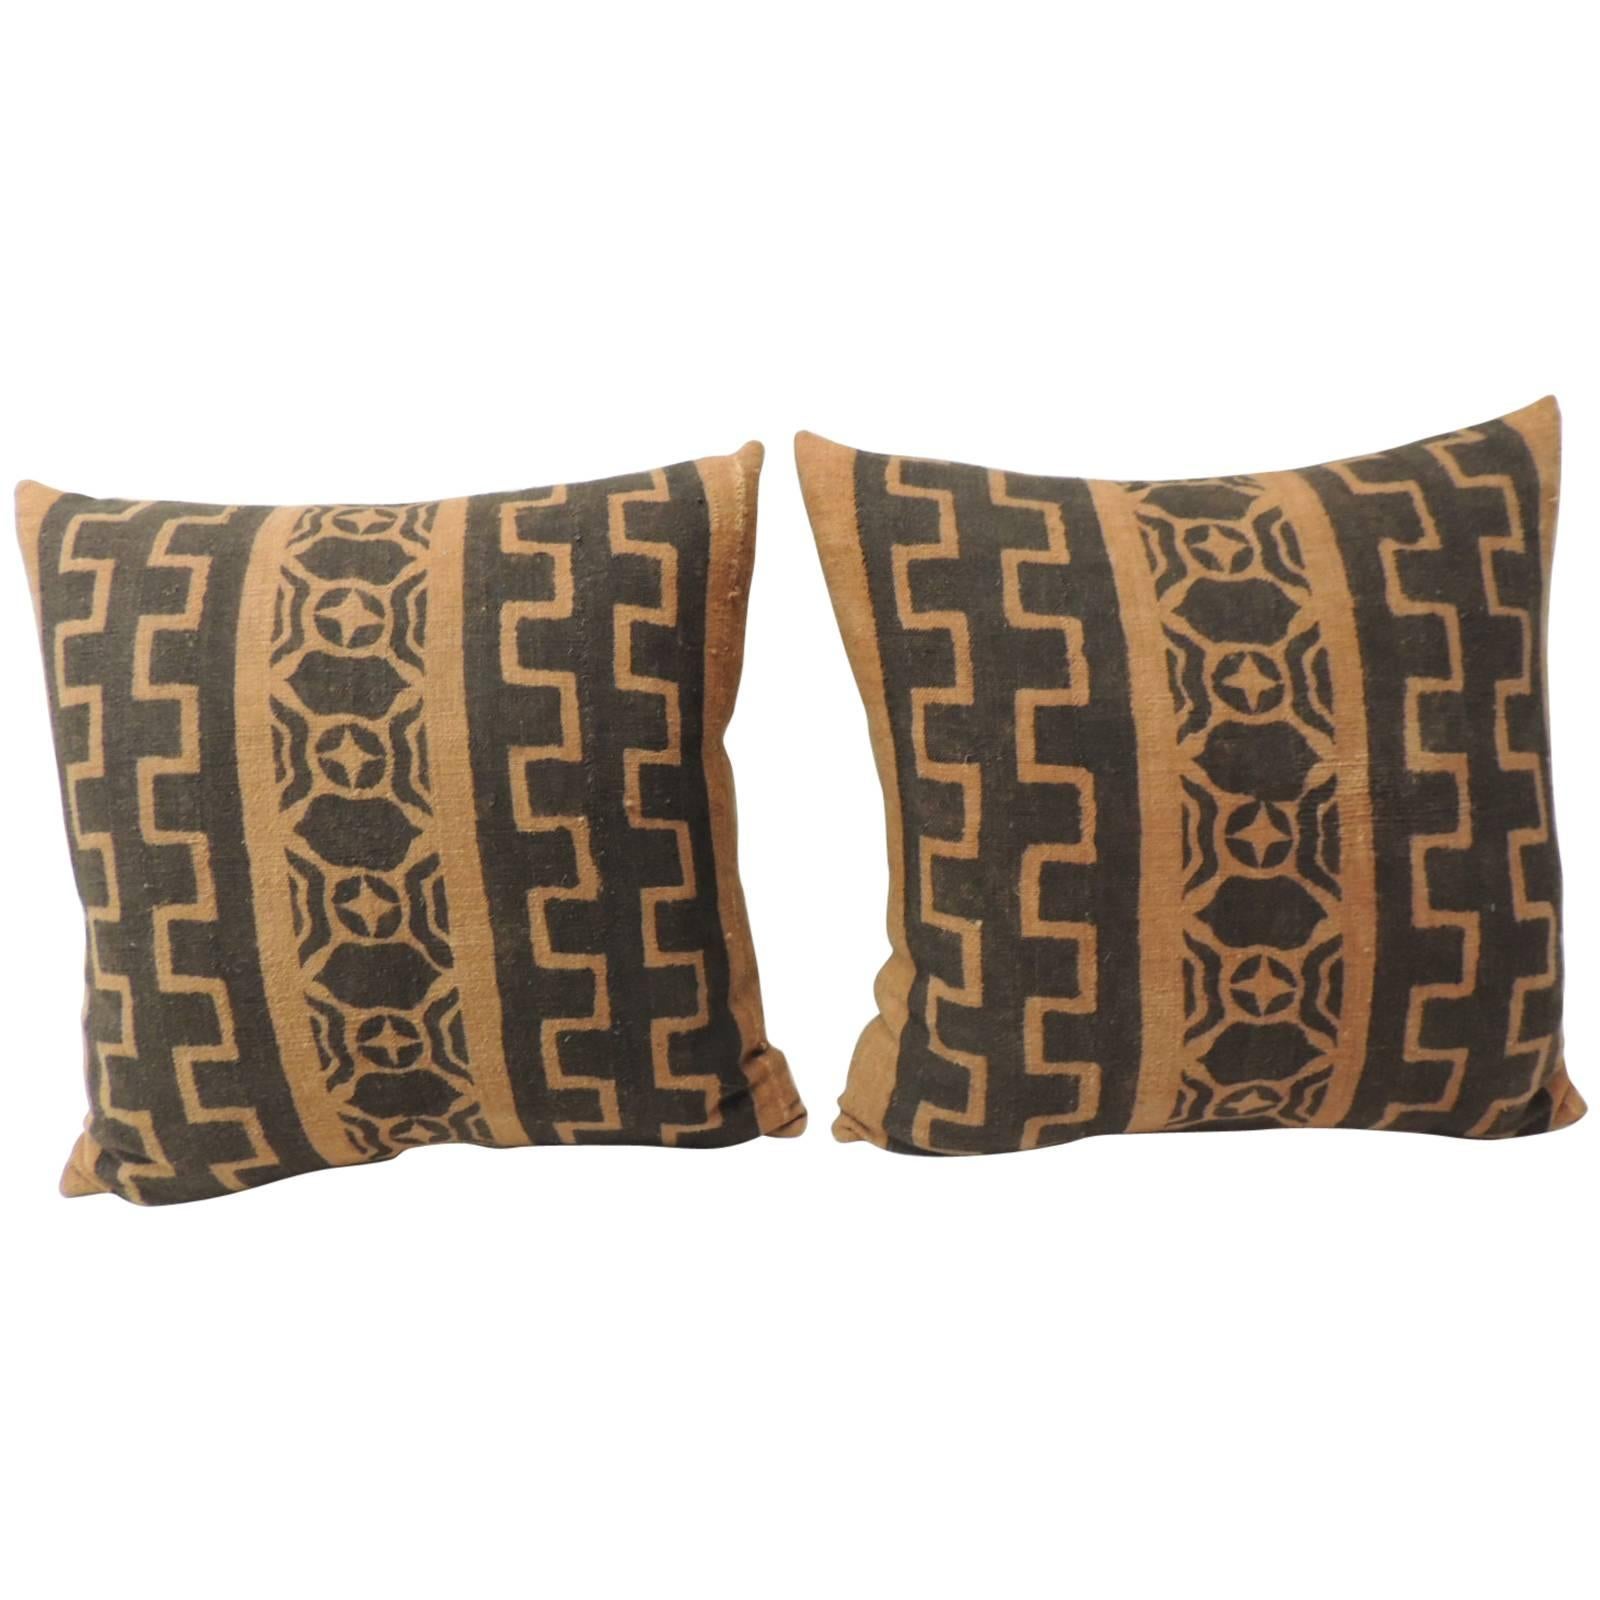 Pair of African Brown Woven Decorative Pillows with Tribal Pattern